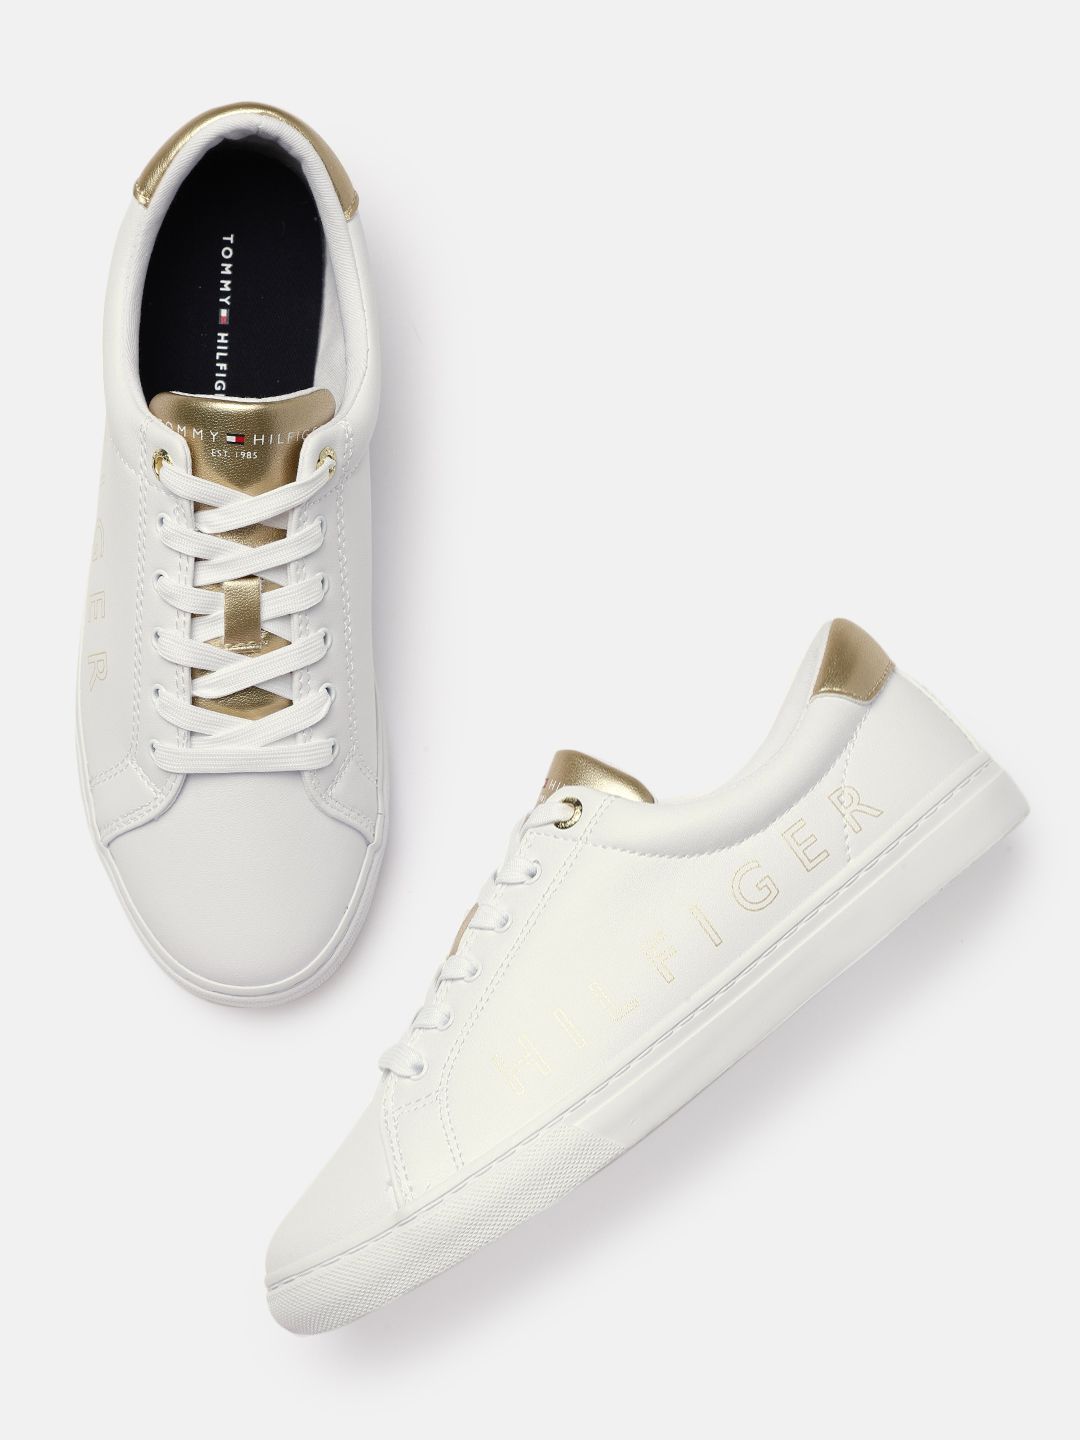 Tommy Hilfiger Women White Printed Sneakers Price in India